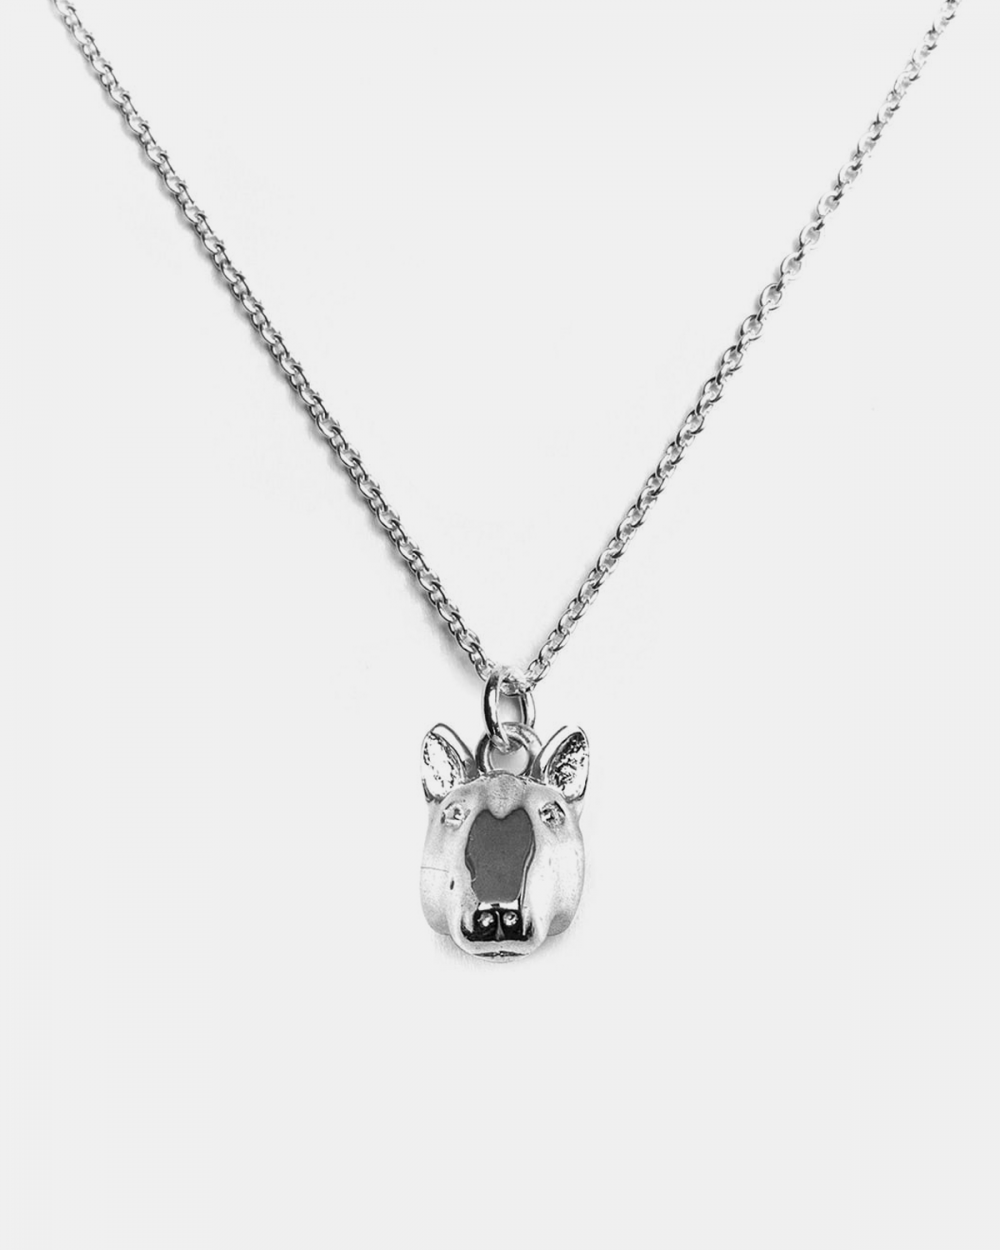 BULL TERRIER PENDANT NECKLACE F040 L60 / POLISHED SILVER